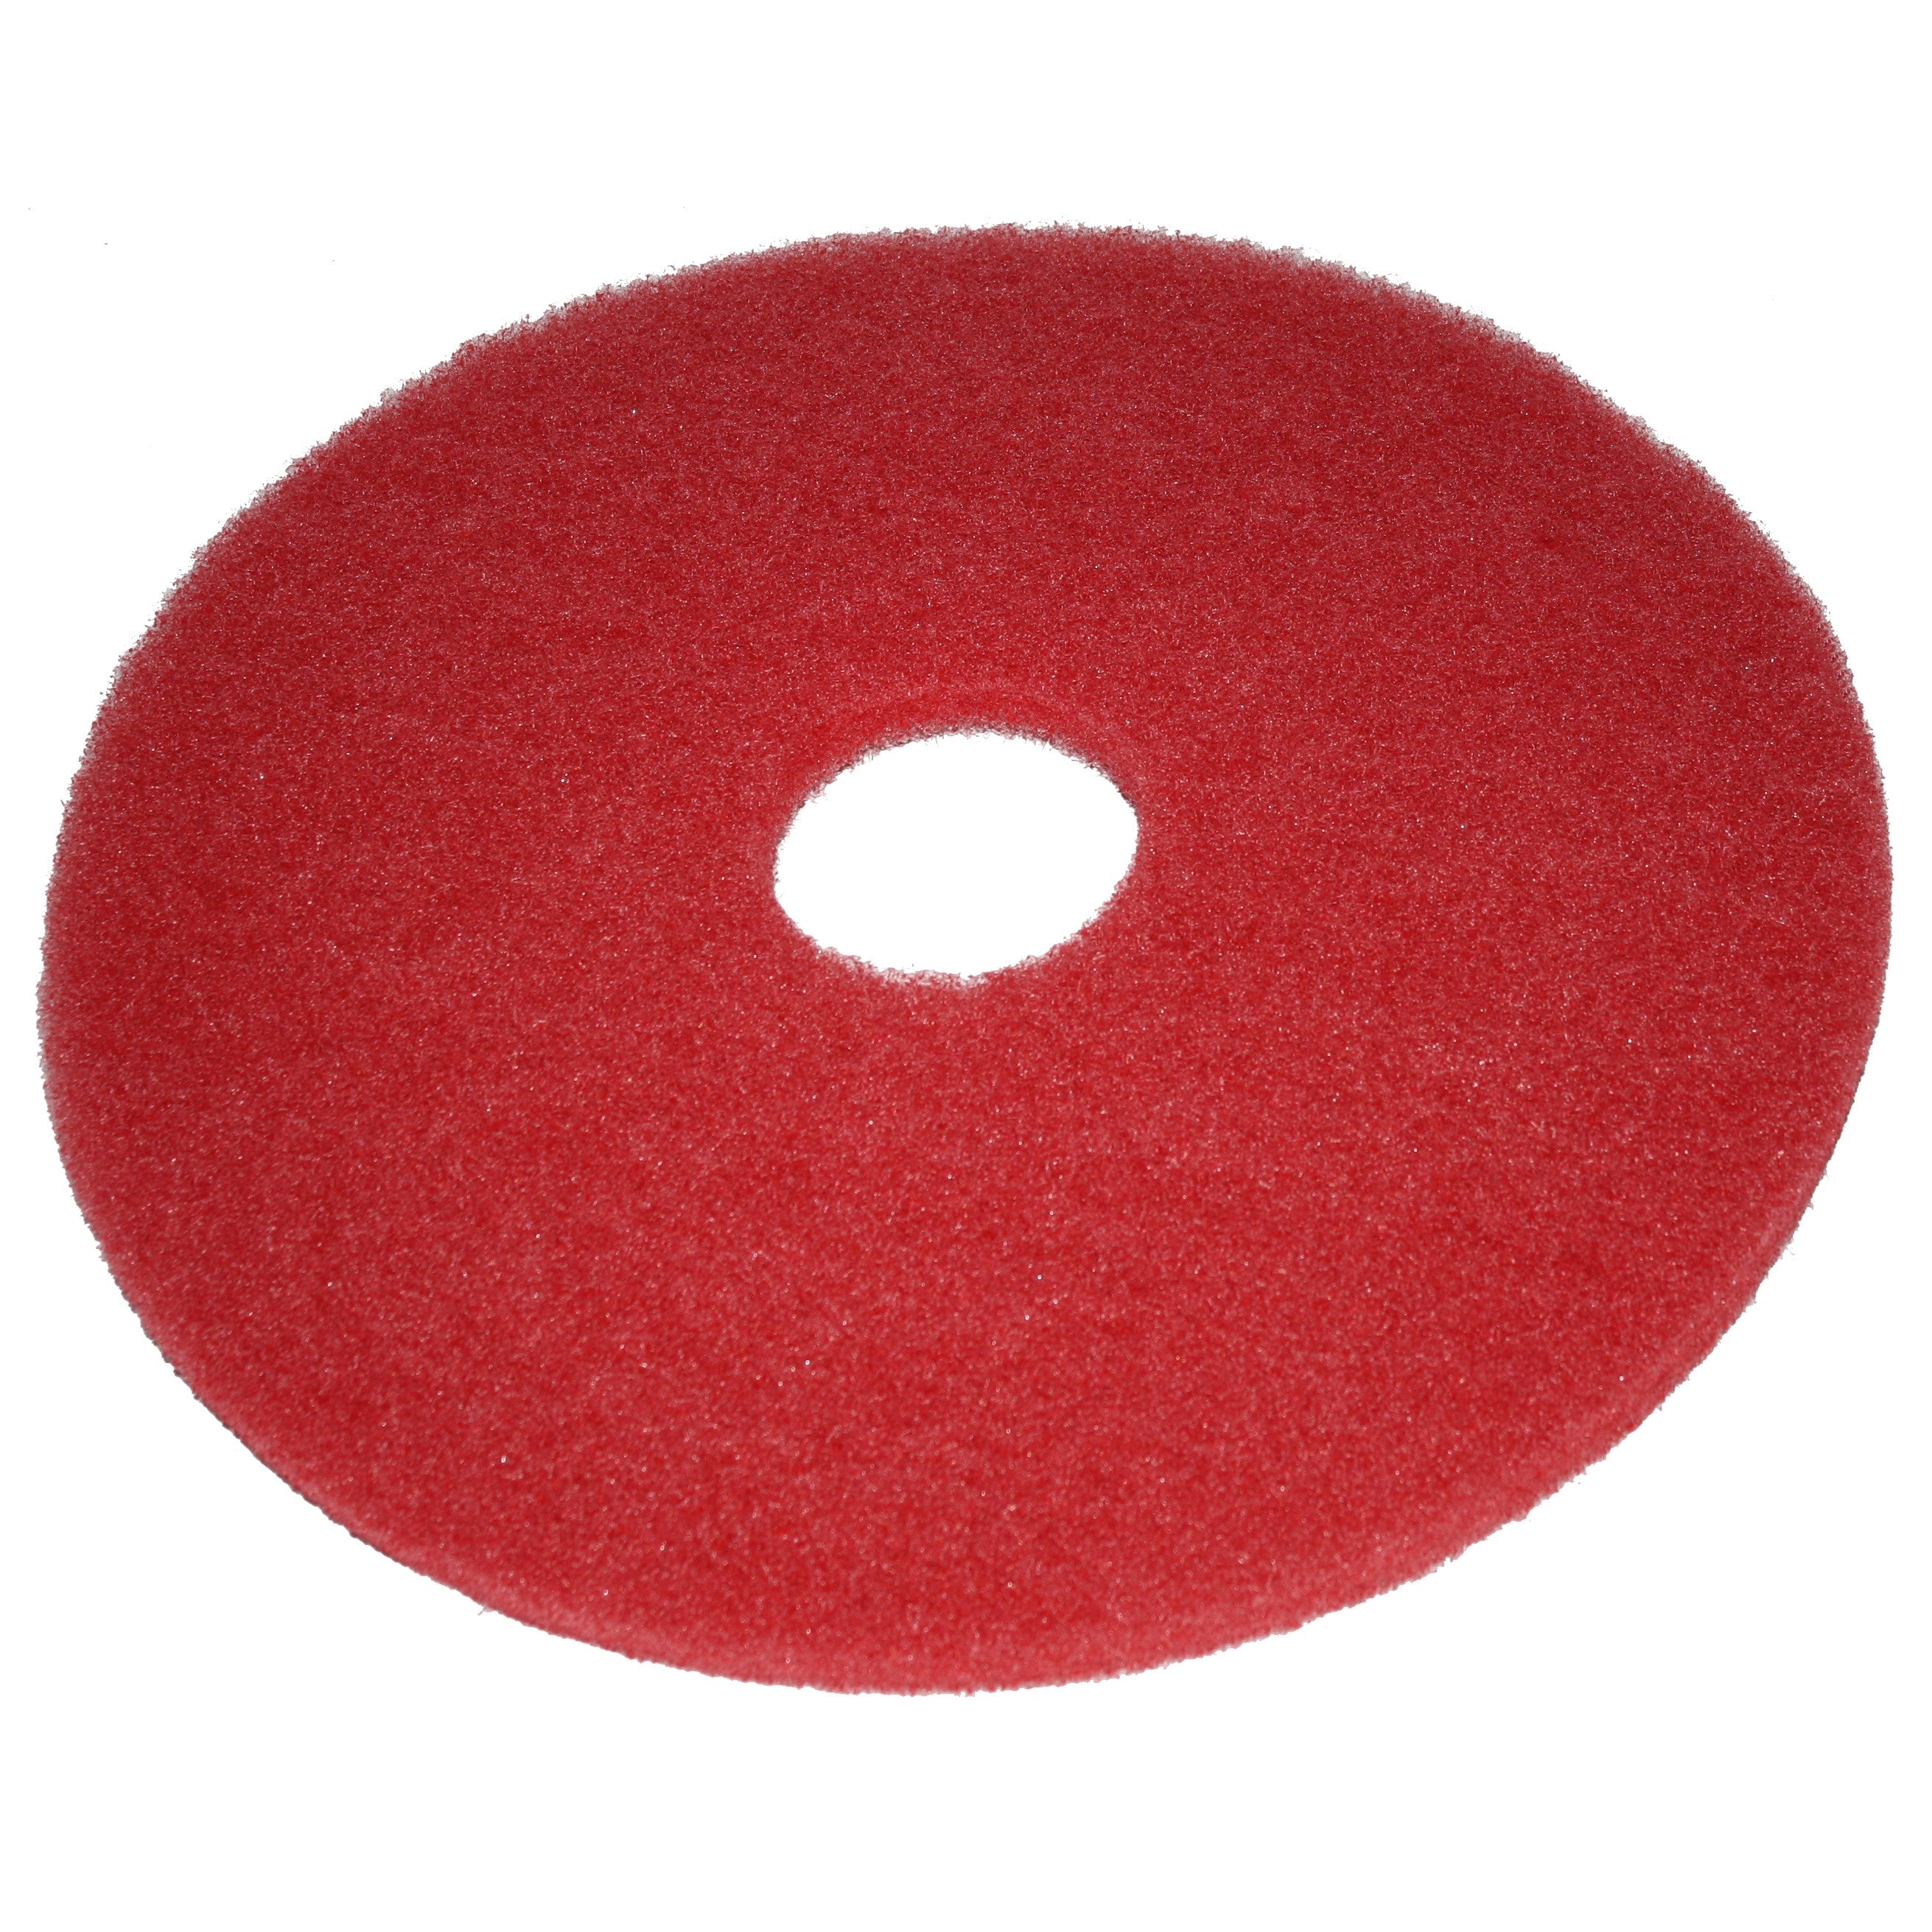 Pad rouge, Ø 532 mm, polyester